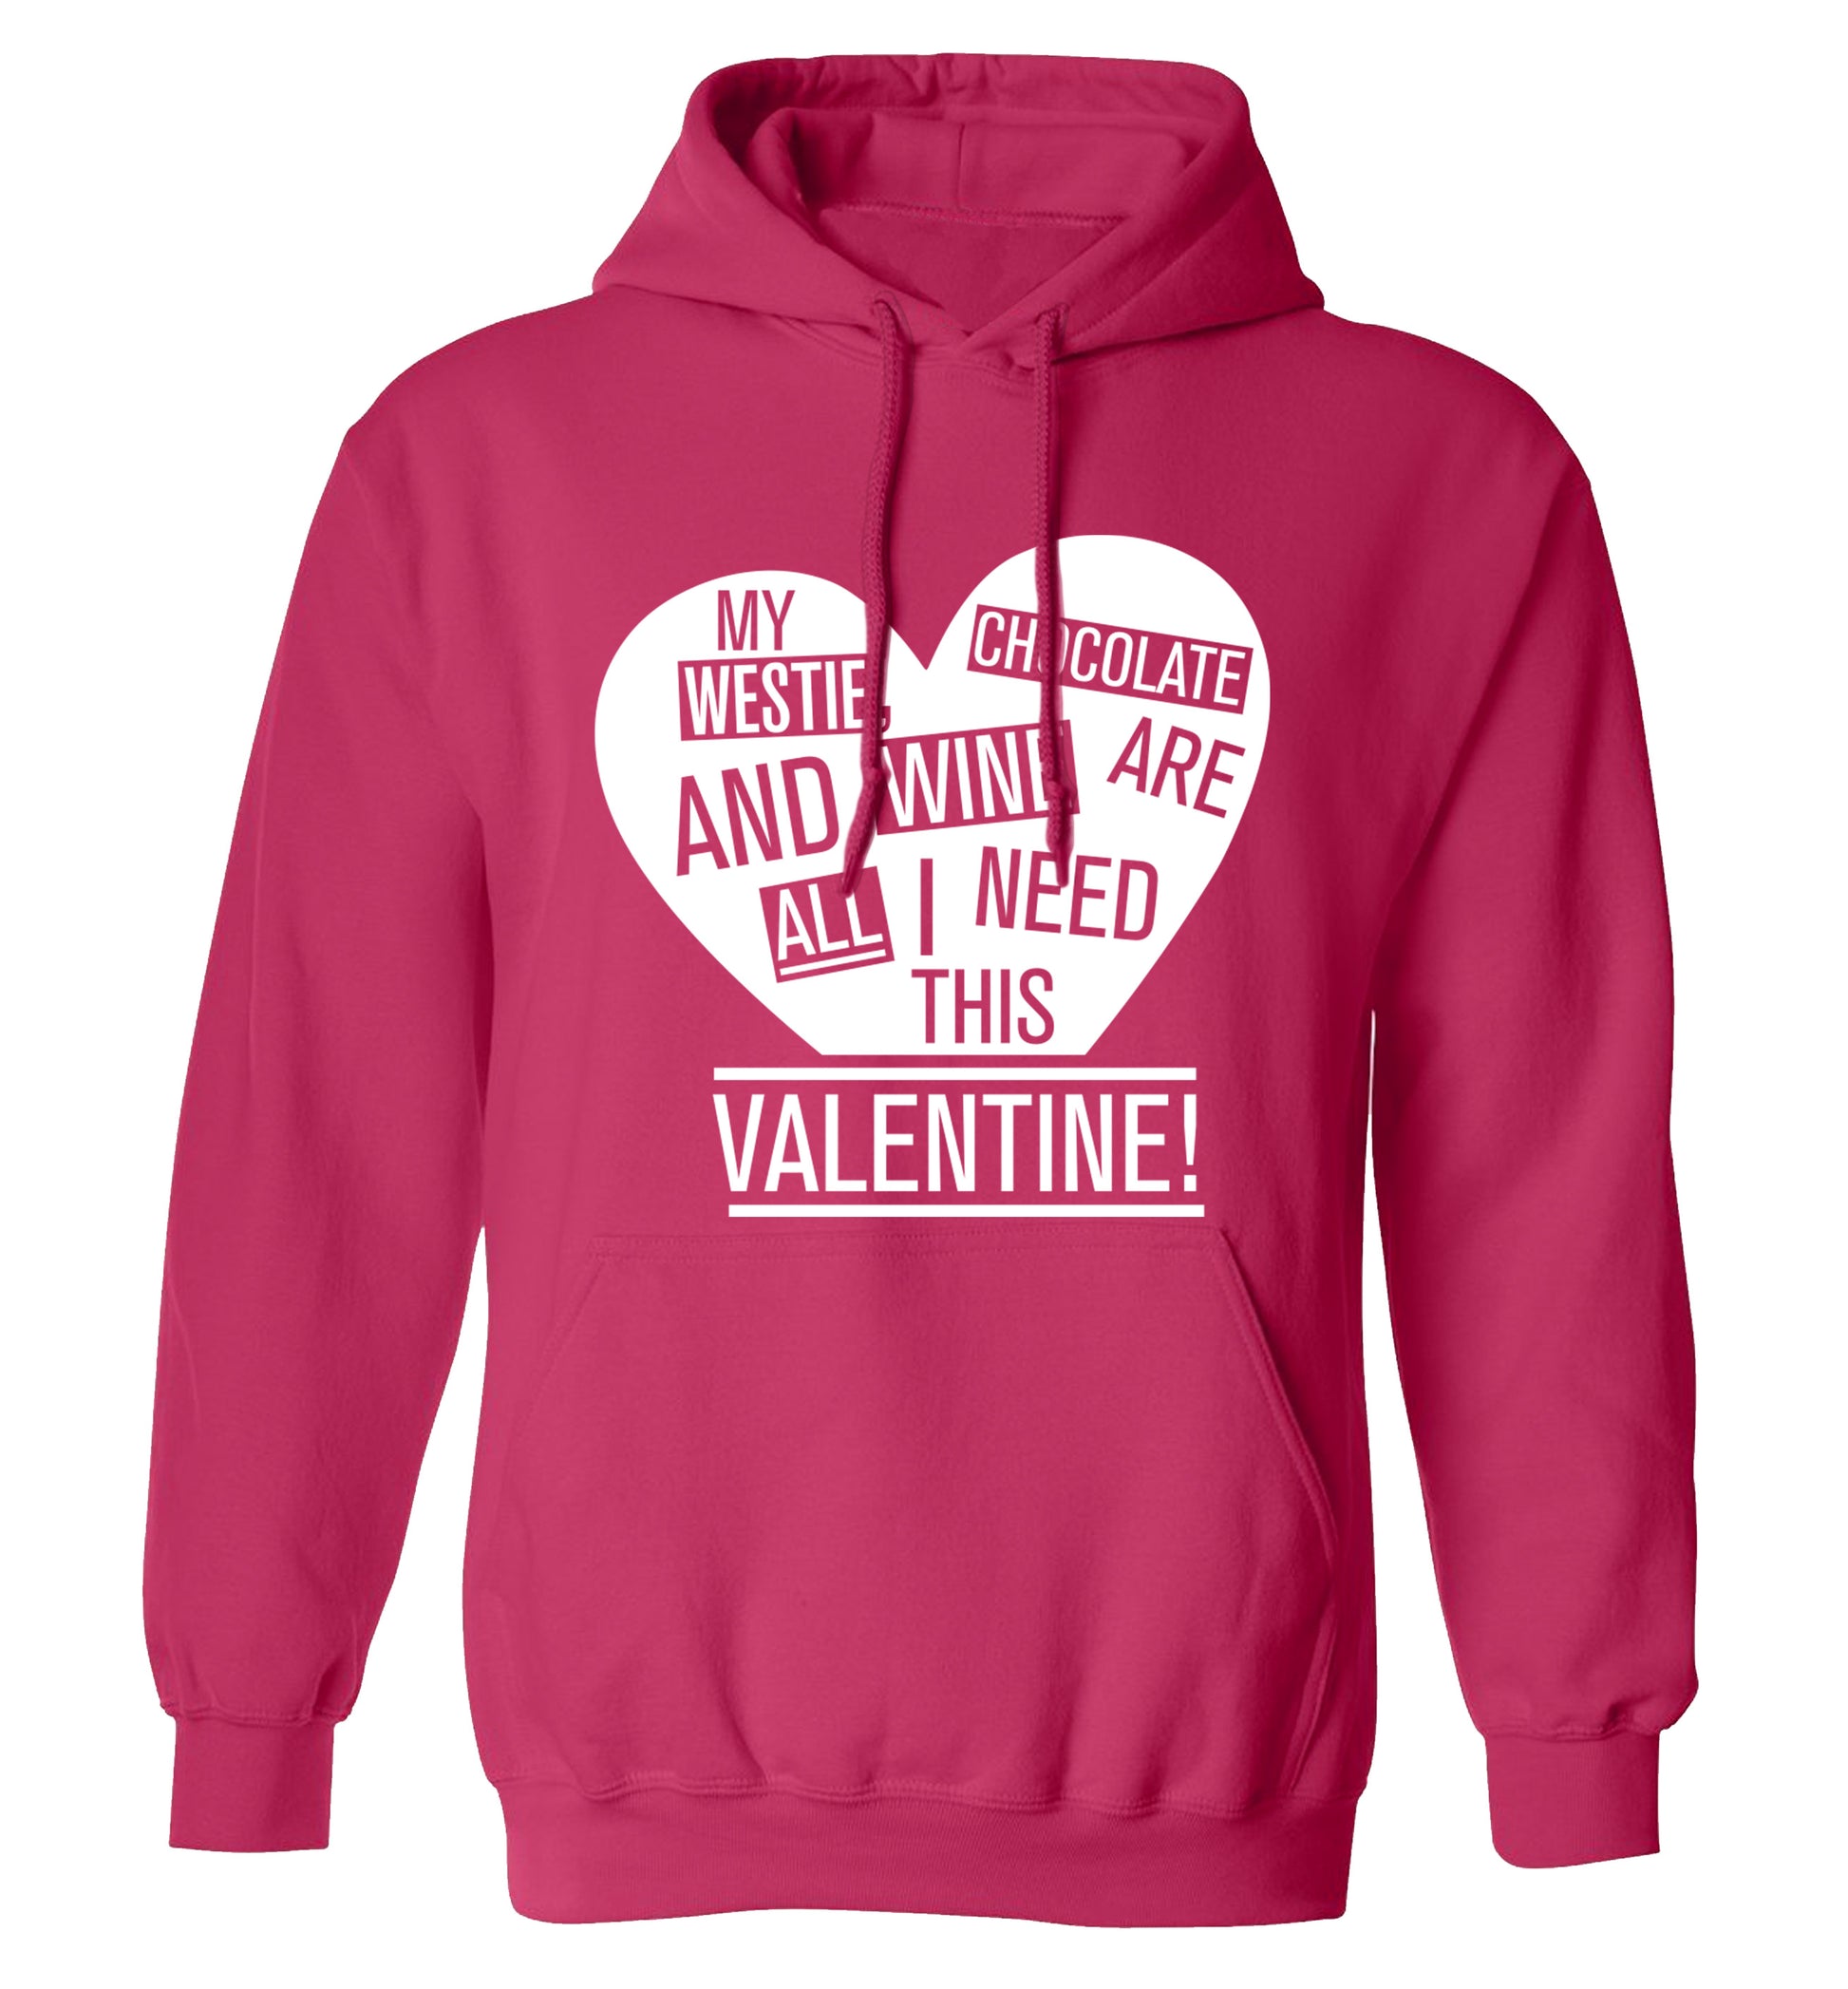 My westie, chocolate and wine are all I need this valentine! adults unisex pink hoodie 2XL